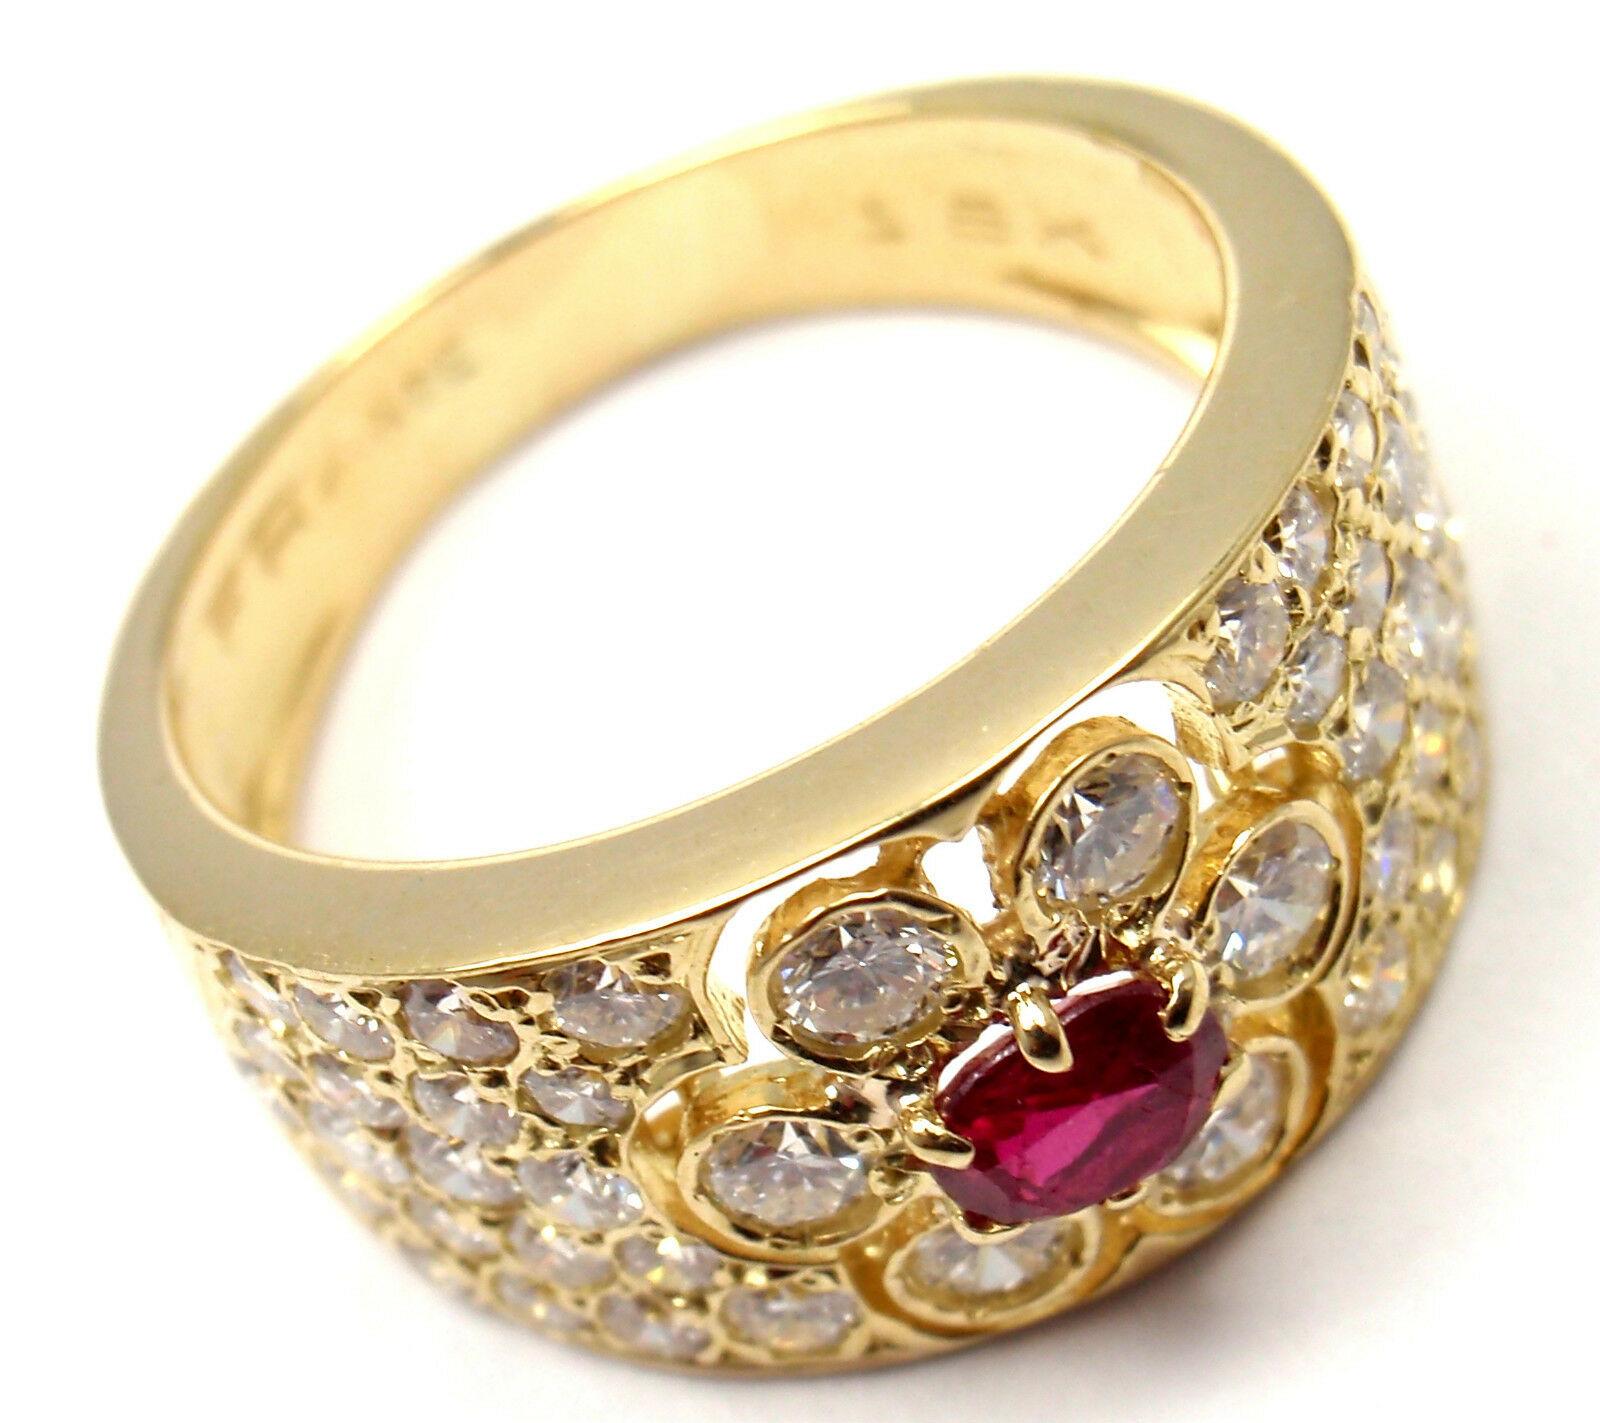 18k Yellow Gold Diamond Ruby Flower Band Ring by Van Cleef & Arpels. 
With 46 round brilliant cut diamond VVS1 clarity, E color total weight approx. 1.25ct
1 round ruby
Details:
Weight: 5.9 grams
Size: 6
Width: 10mm
Stamped Hallmarks: VCA France 18k